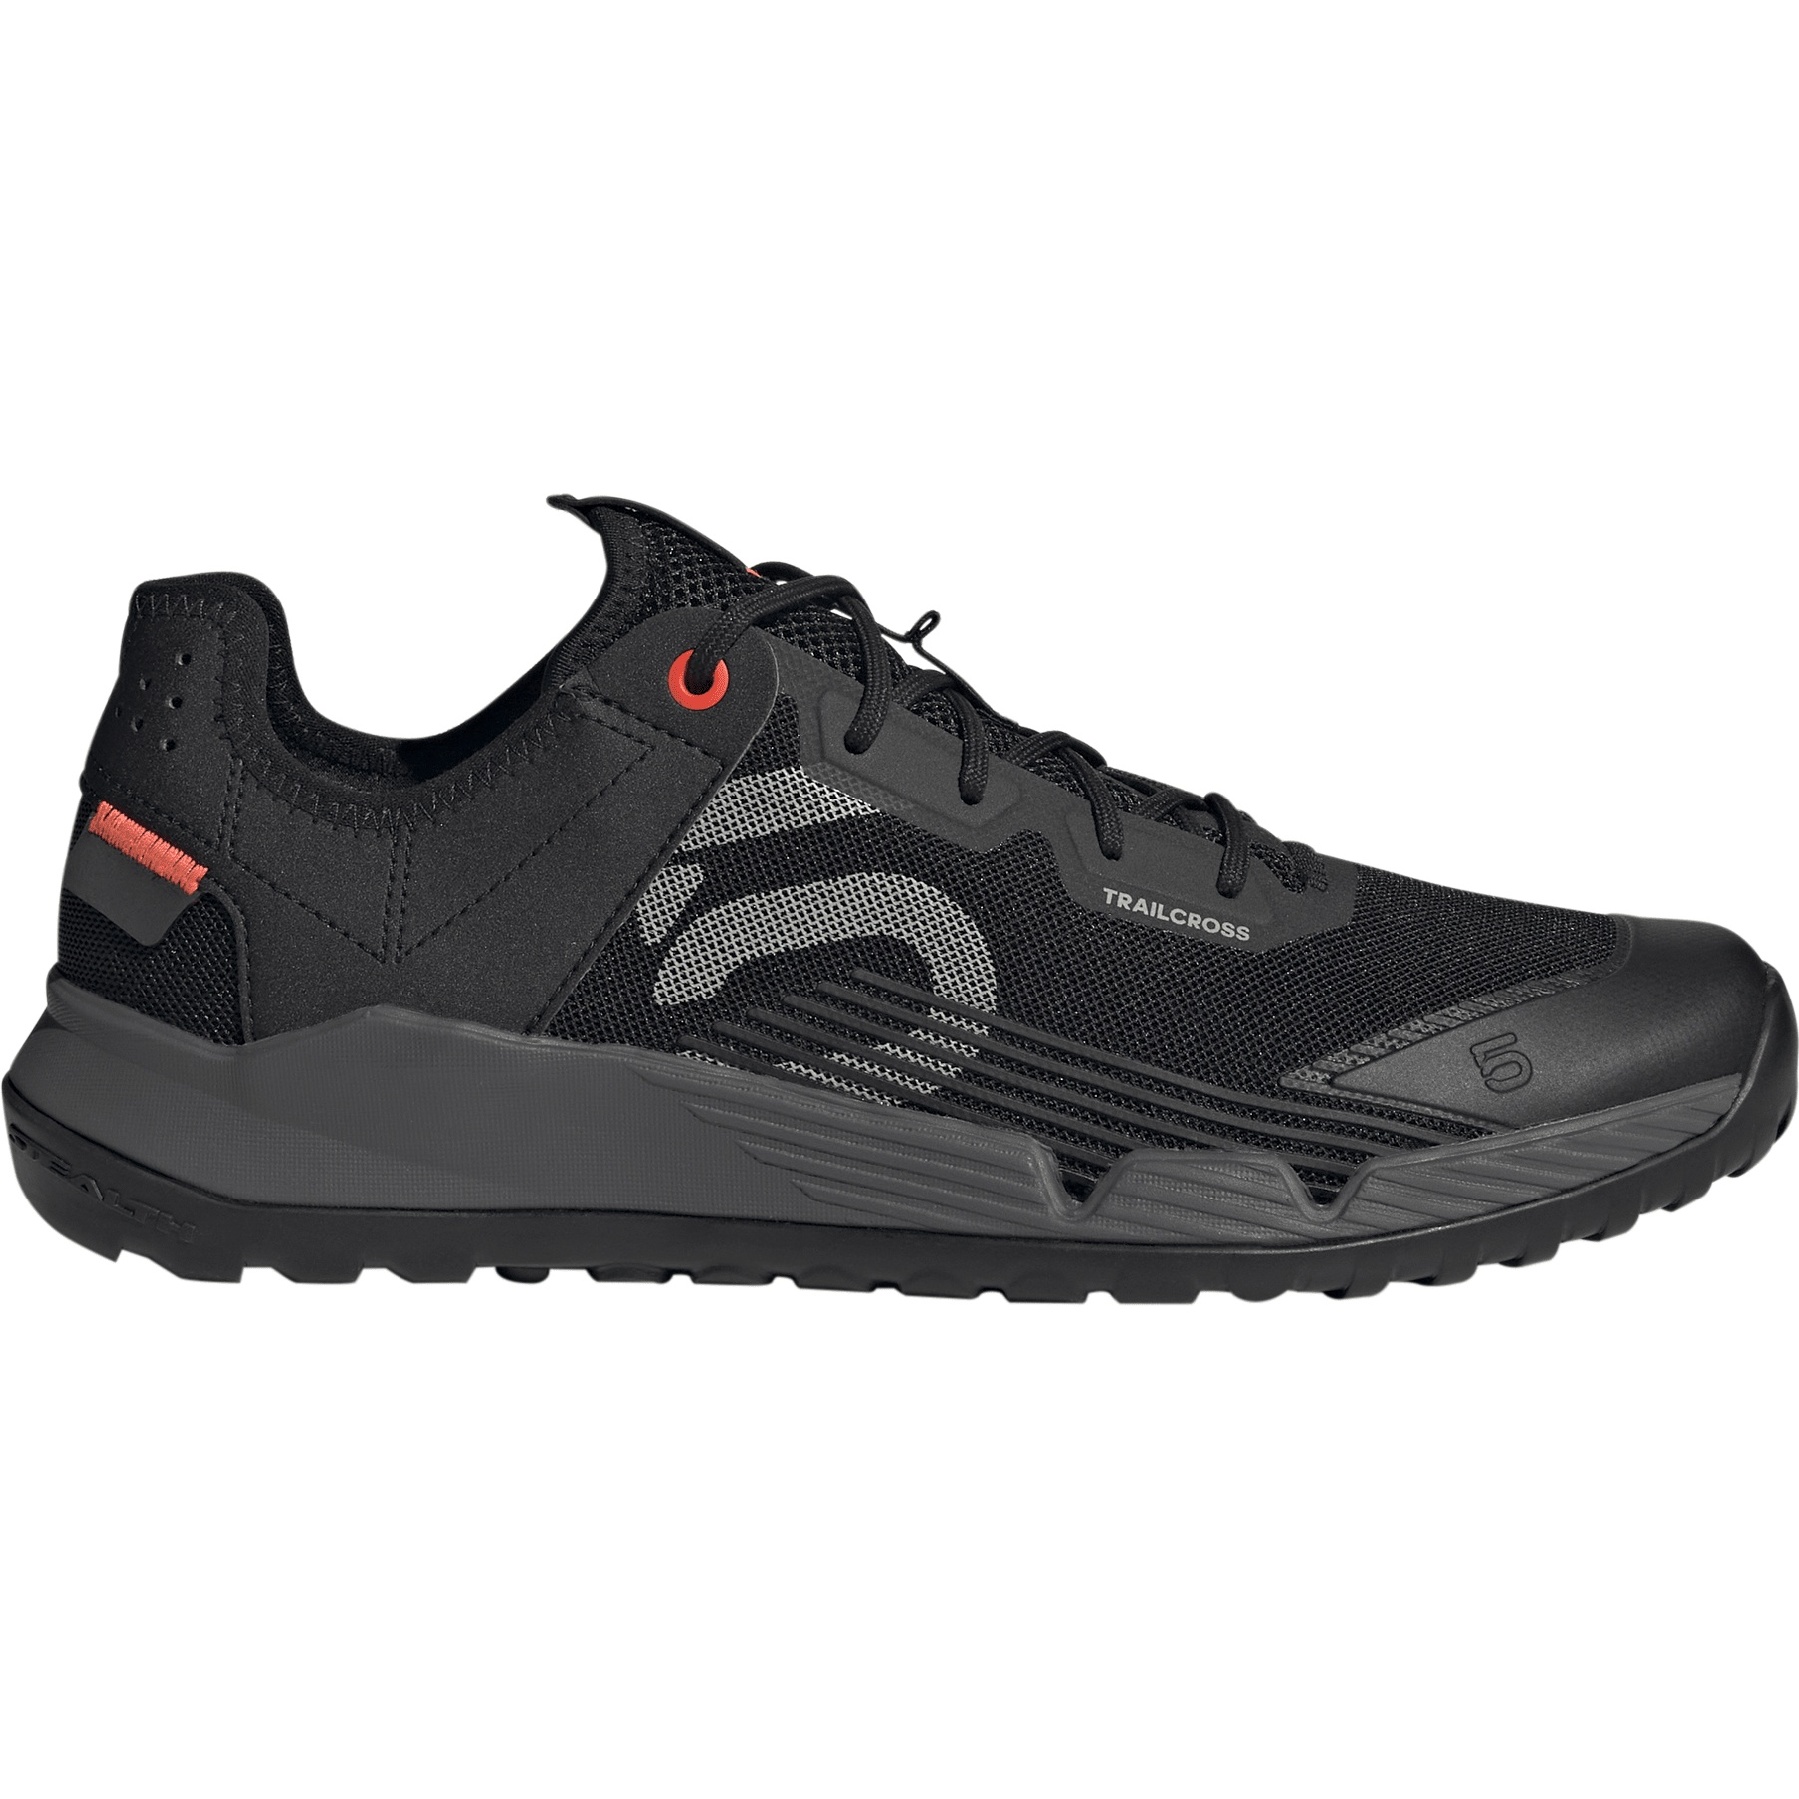 Picture of Five Ten Trailcross LT Mountain Bike Shoes - Core Black / Grey Three / Solar Red